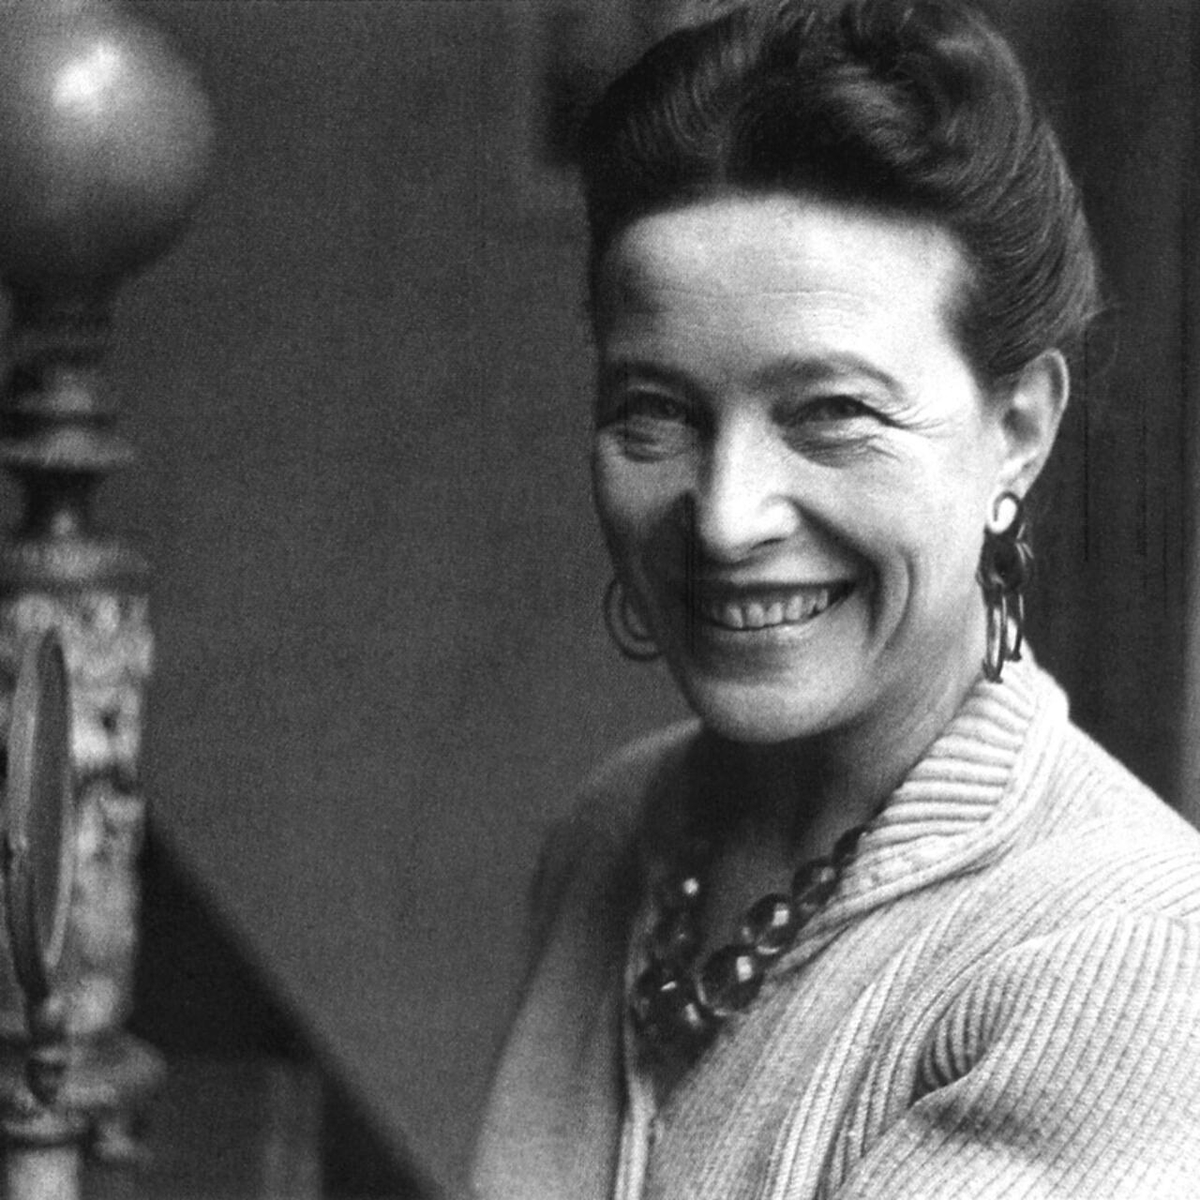 “One’s life has value so long as one attributes value to the life of others, by means of love, friendship, indignation and compassion.” 

#SimoneDeBeauvoir